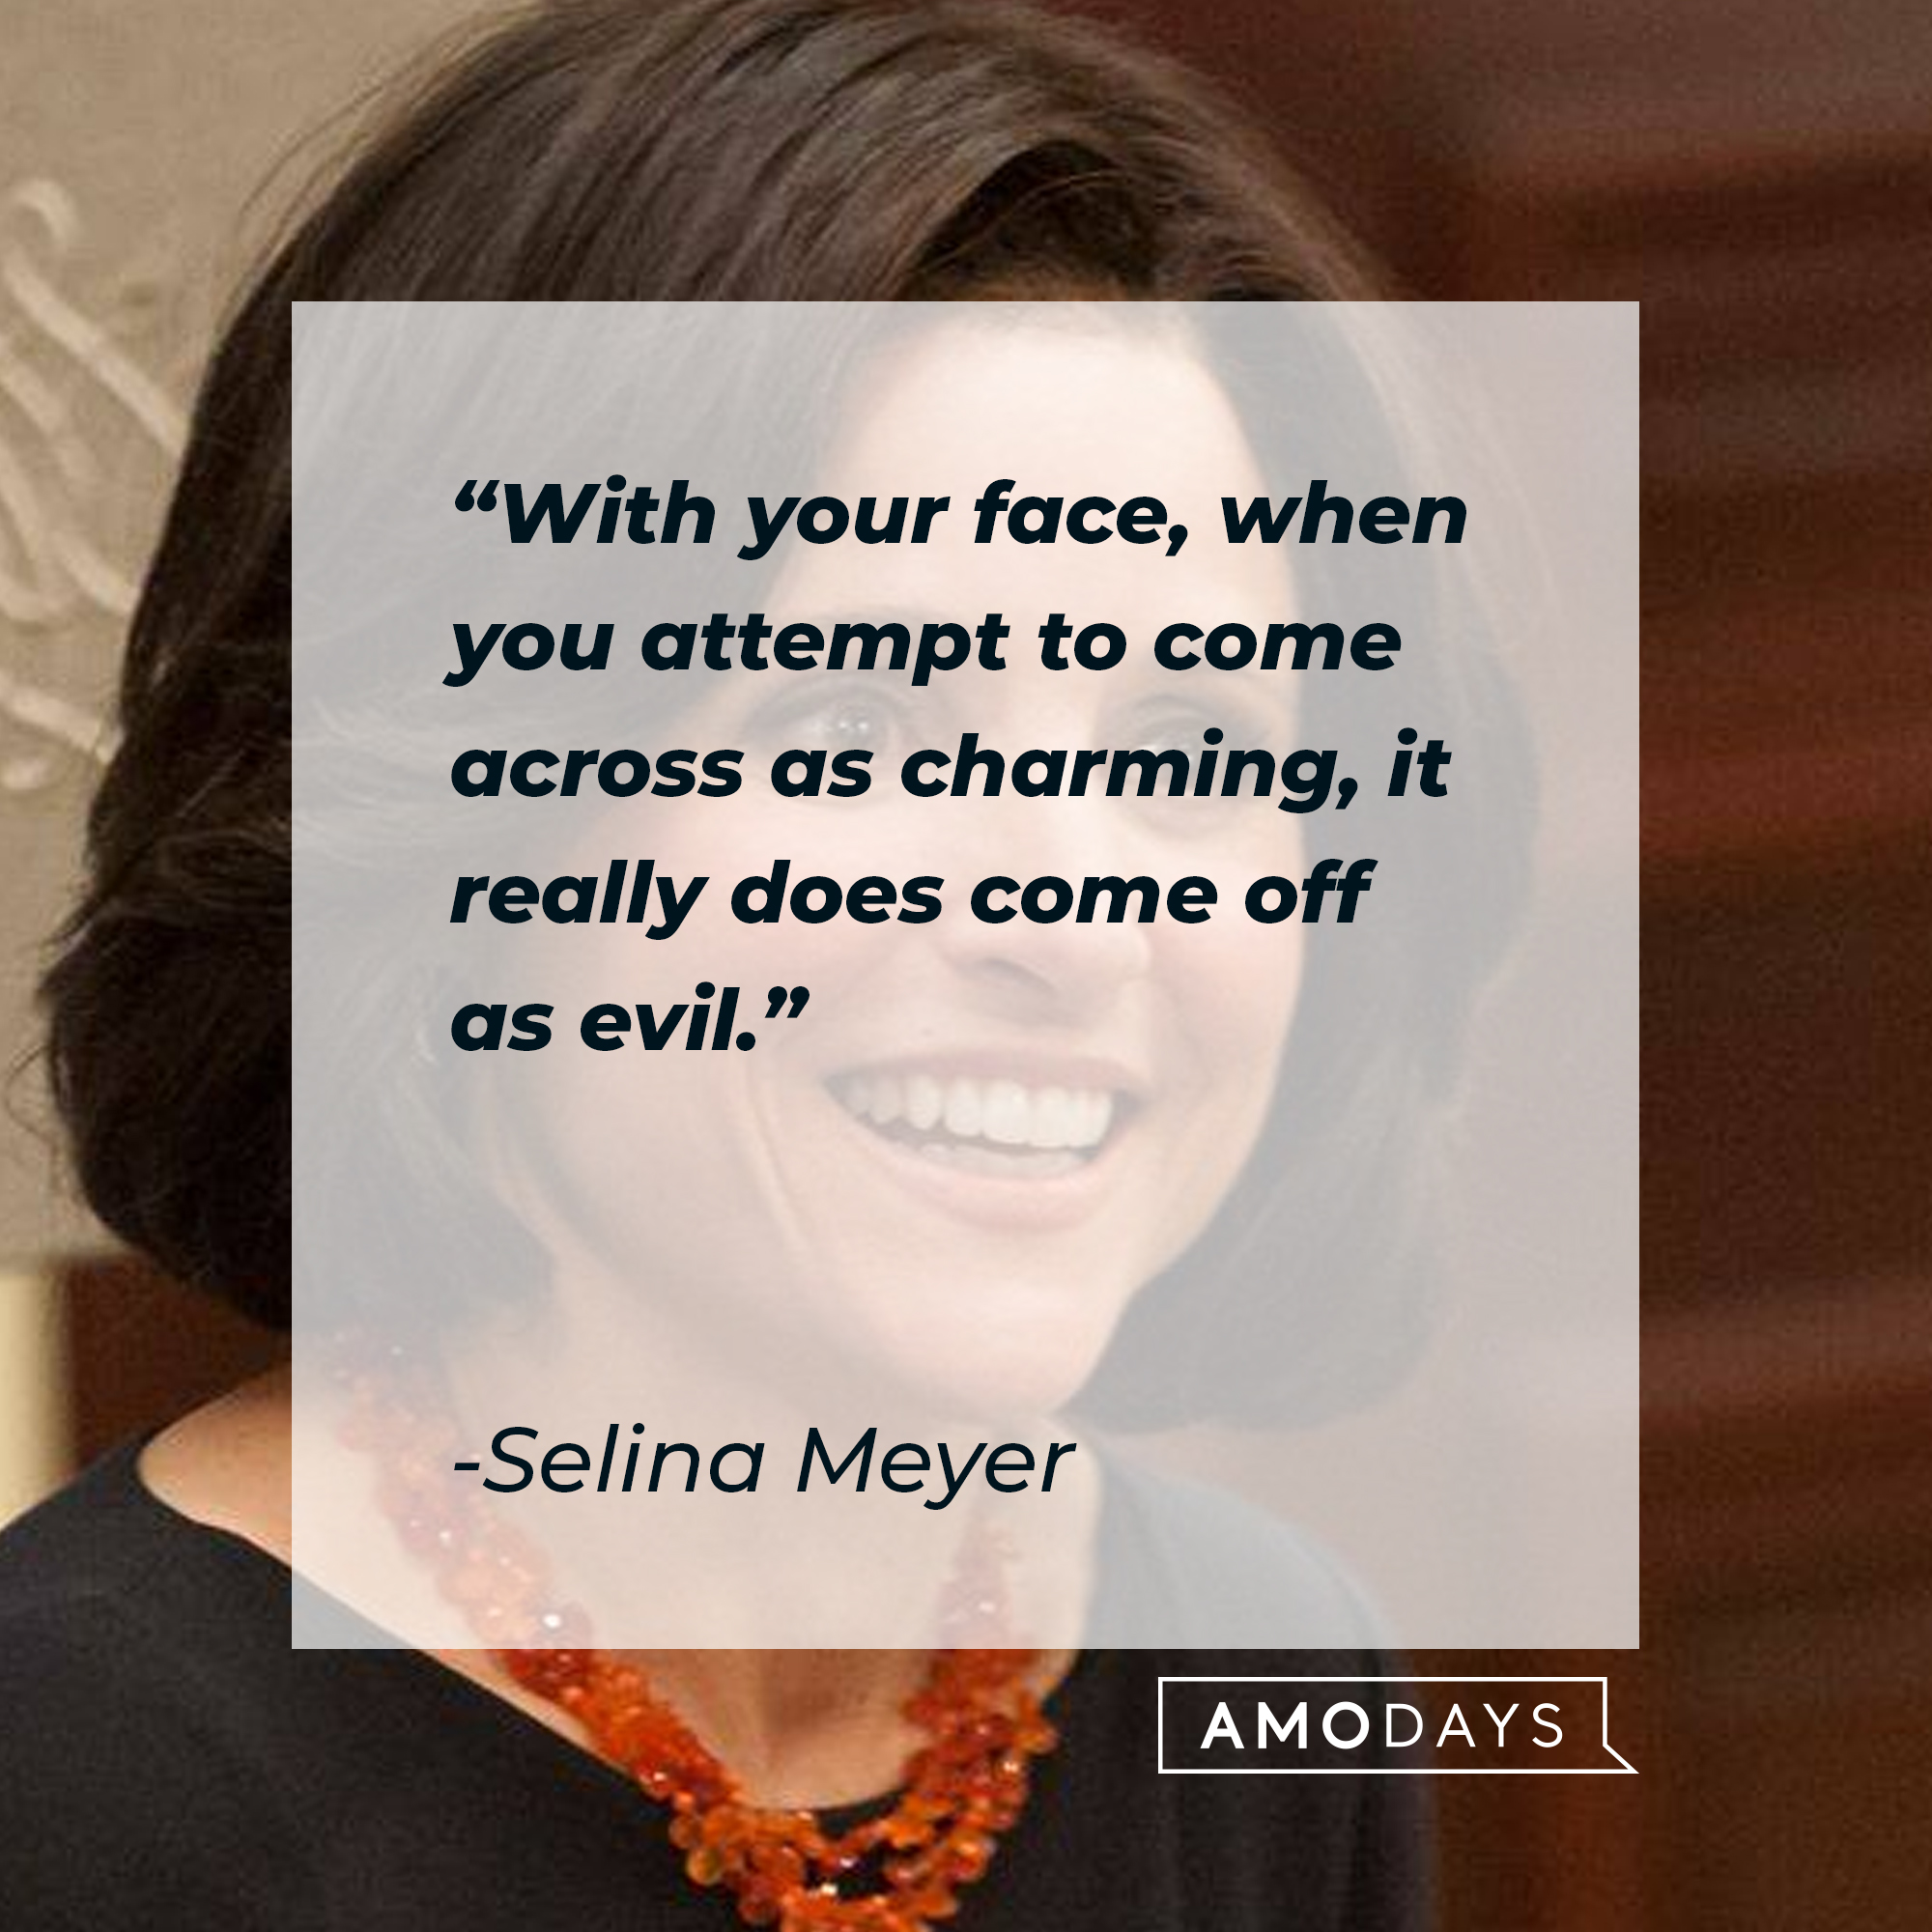 Selina Meyer, with her quote: "With your face, when you attempt to come across as charming, it really does come off as evil." | Source: Facebook.com/veep